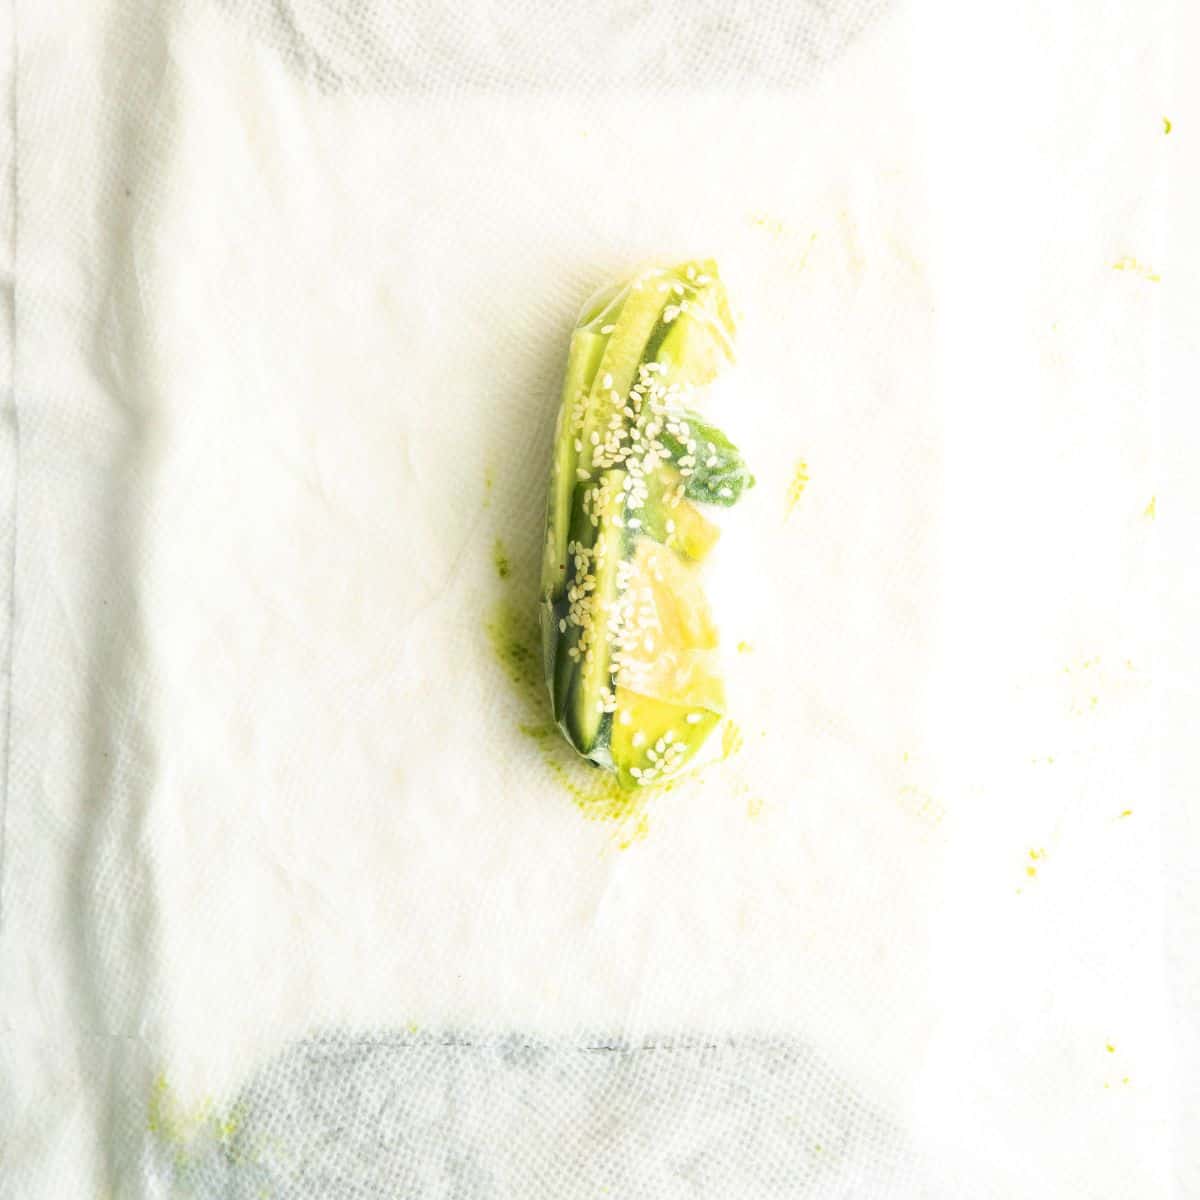 Rice paper filled with avocado and rice noodles to make spring rolls.